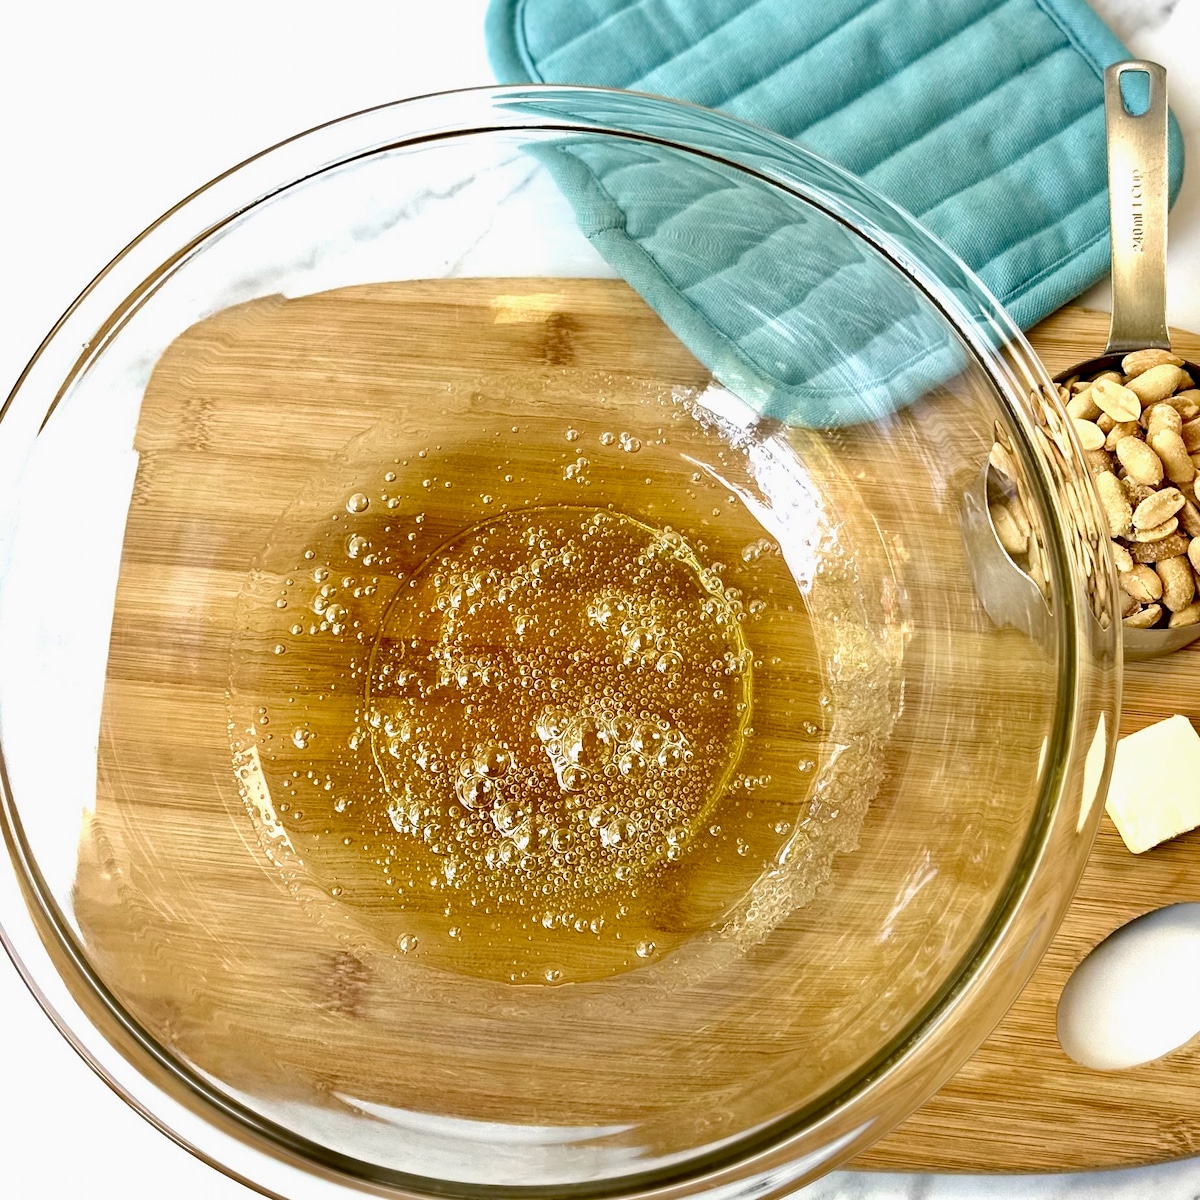 Glass bowl with golden color sugar mixture in bottom for peanut brittle on wooden cutting board.